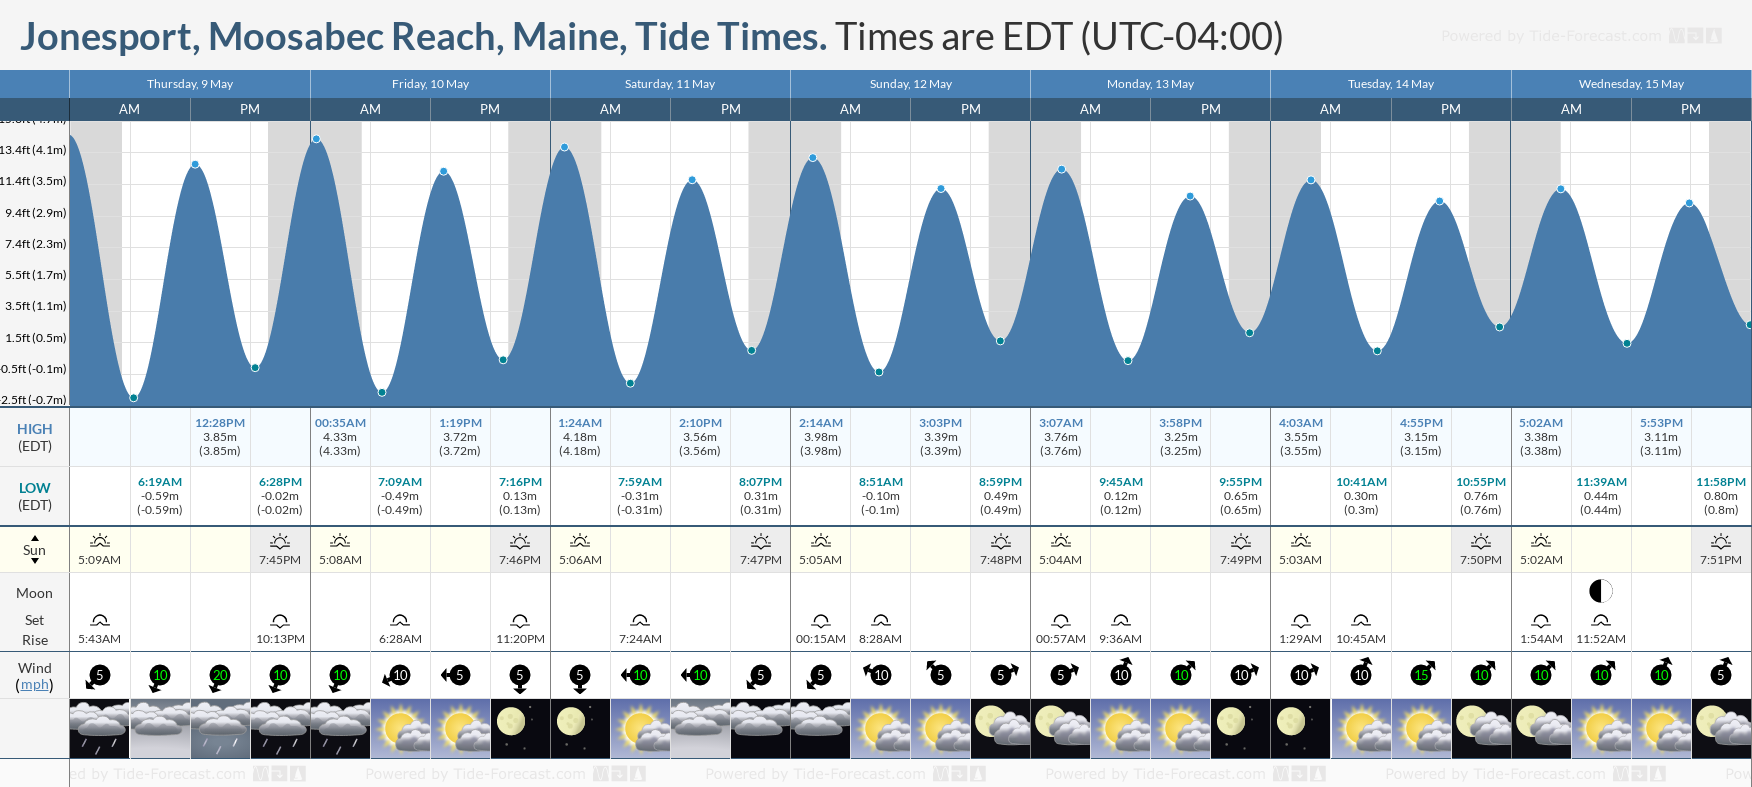 Jonesport, Moosabec Reach, Maine Tide Chart including high and low tide times for the next 7 days